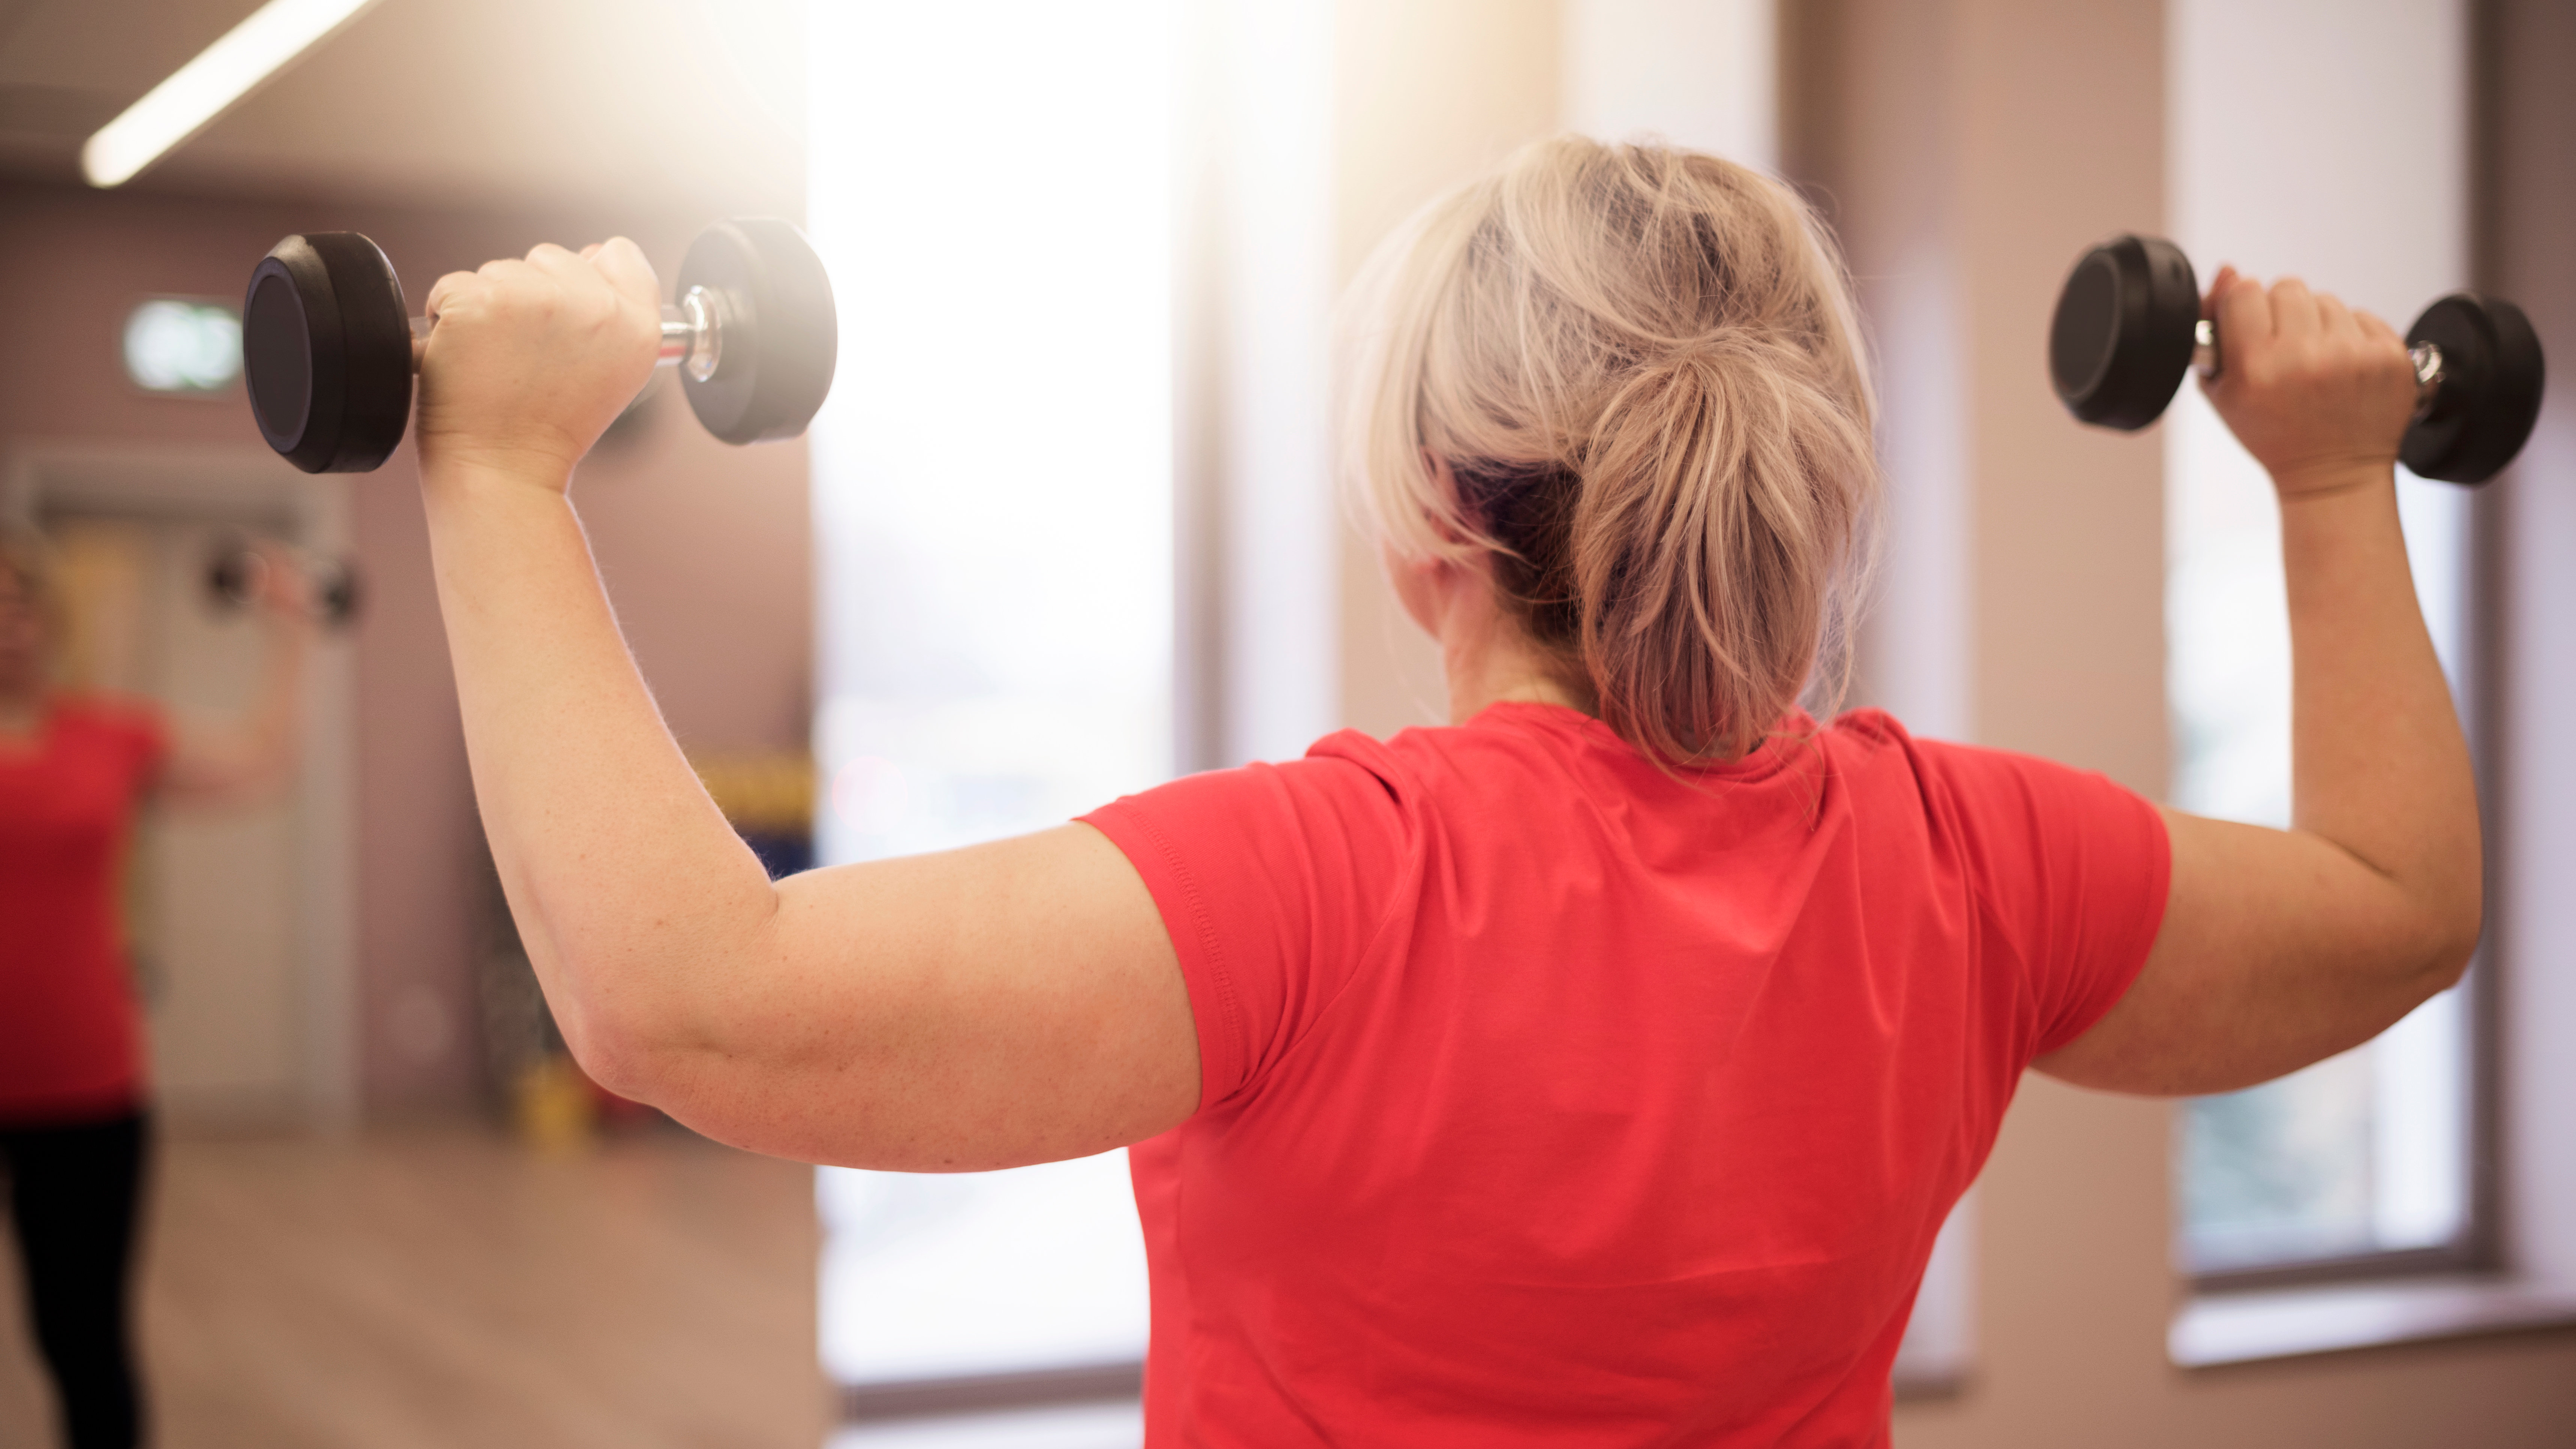 Woman holding dumbbell in each arm at shoulder height